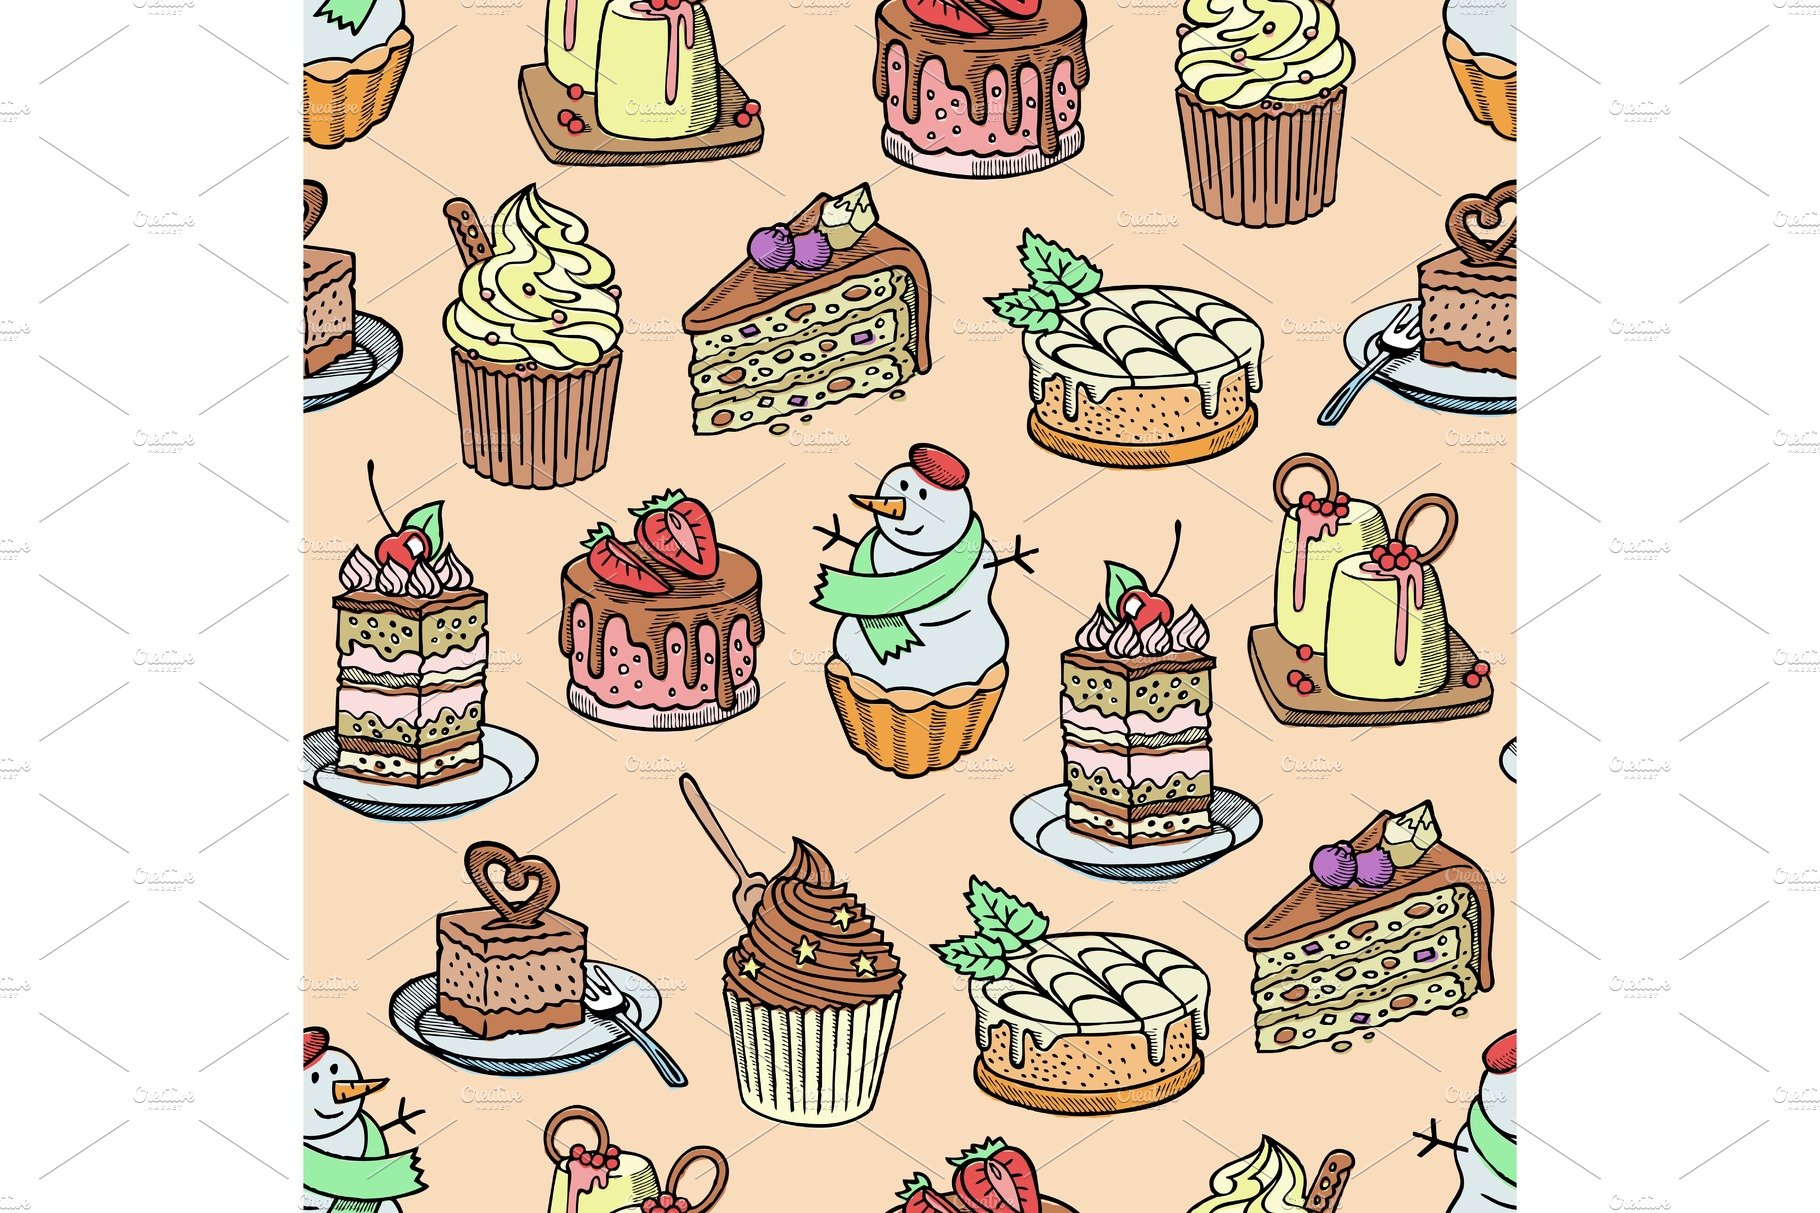 Cakes and cupcakes vector piece of cover image.